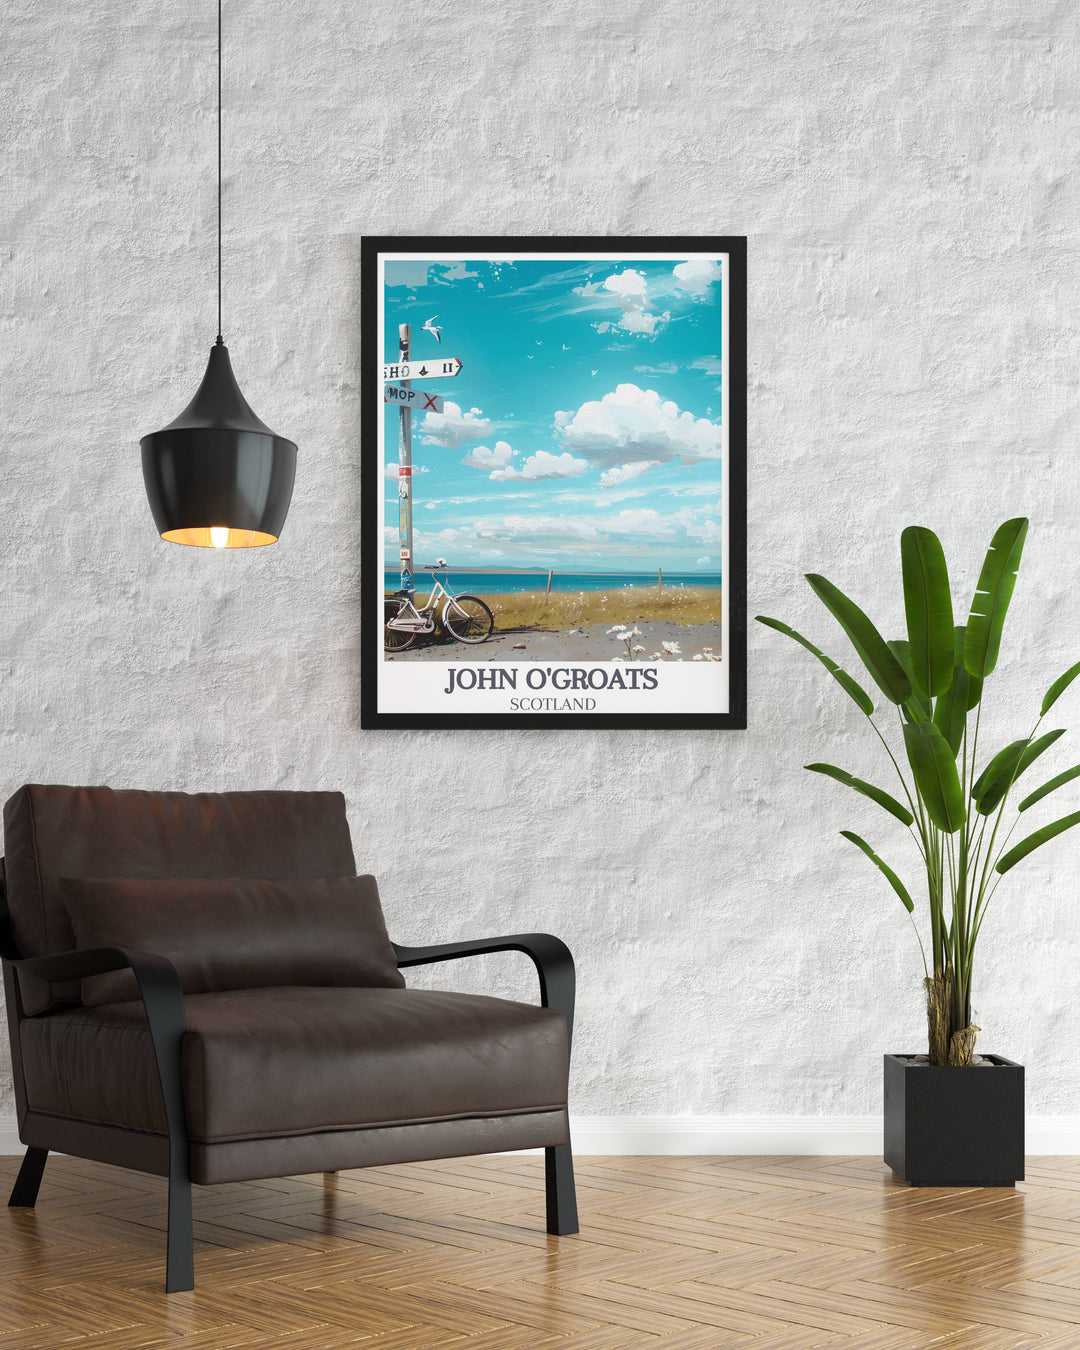 John O Groats Signpost framed print capturing the essence of the epic cycling journey from John O Groats to Lands End. This piece is a must have for any cyclists collection, adding inspiration and motivation to your space.